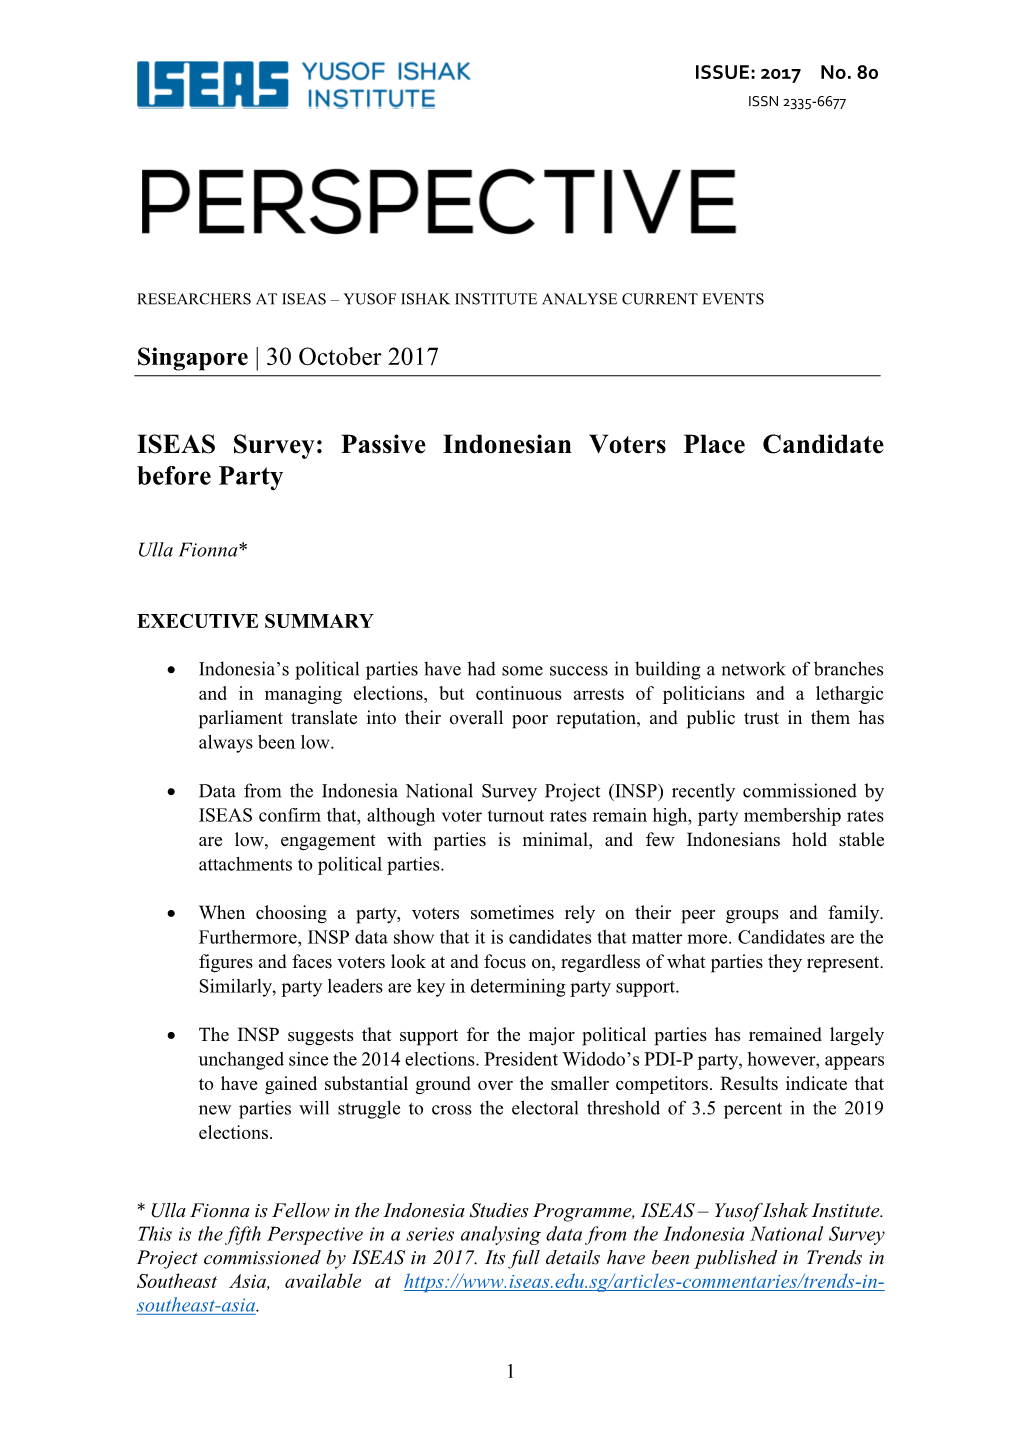 ISEAS Survey: Passive Indonesian Voters Place Candidate Before Party